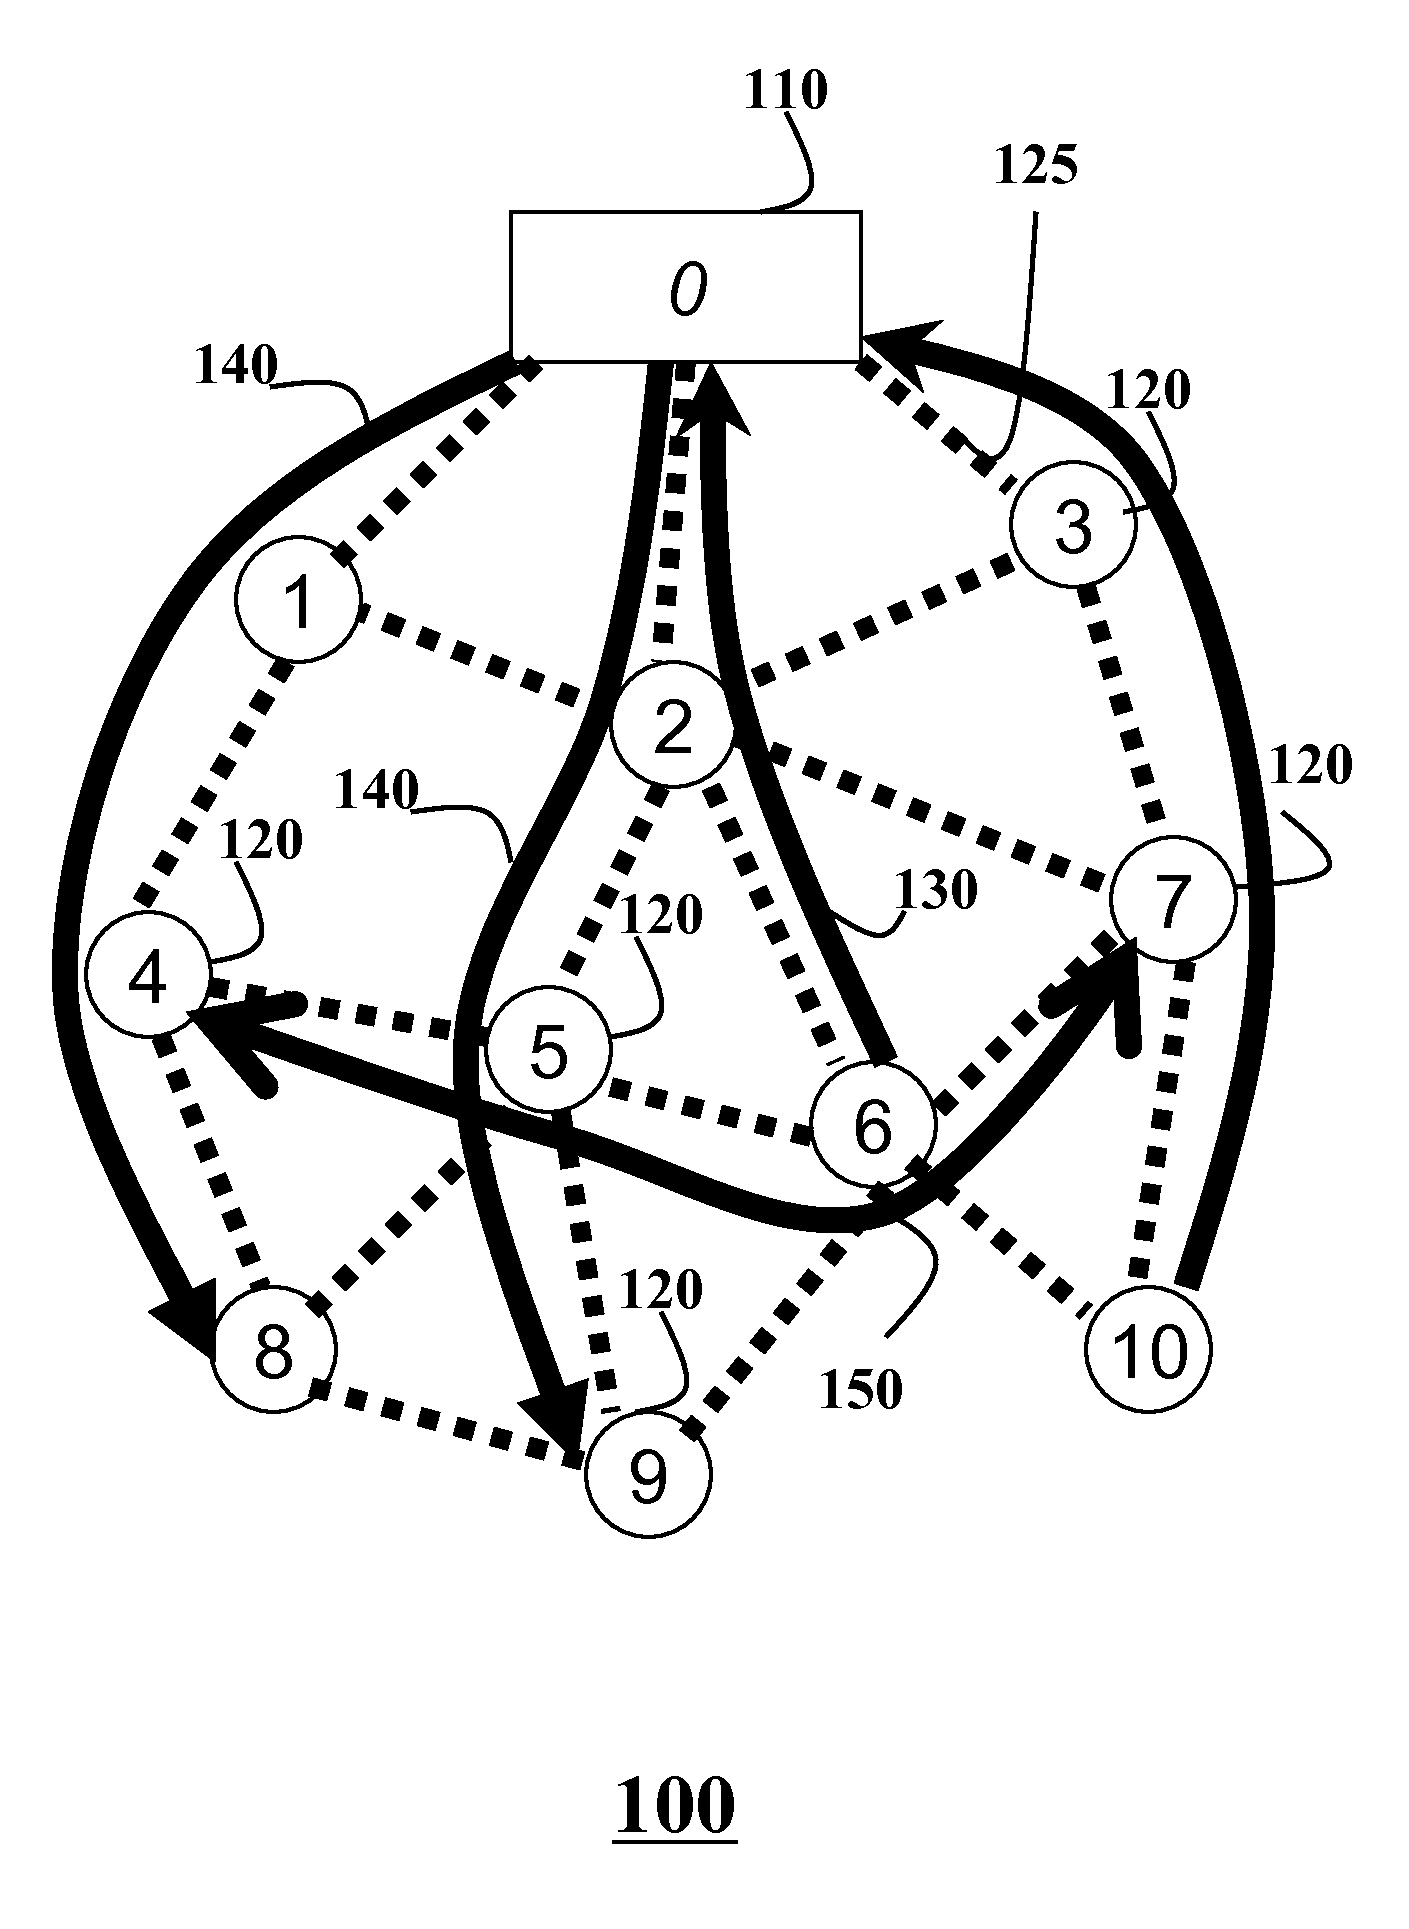 Ranking Nodes in Networks with Topologies Arranged as Directed Acyclic Graphs